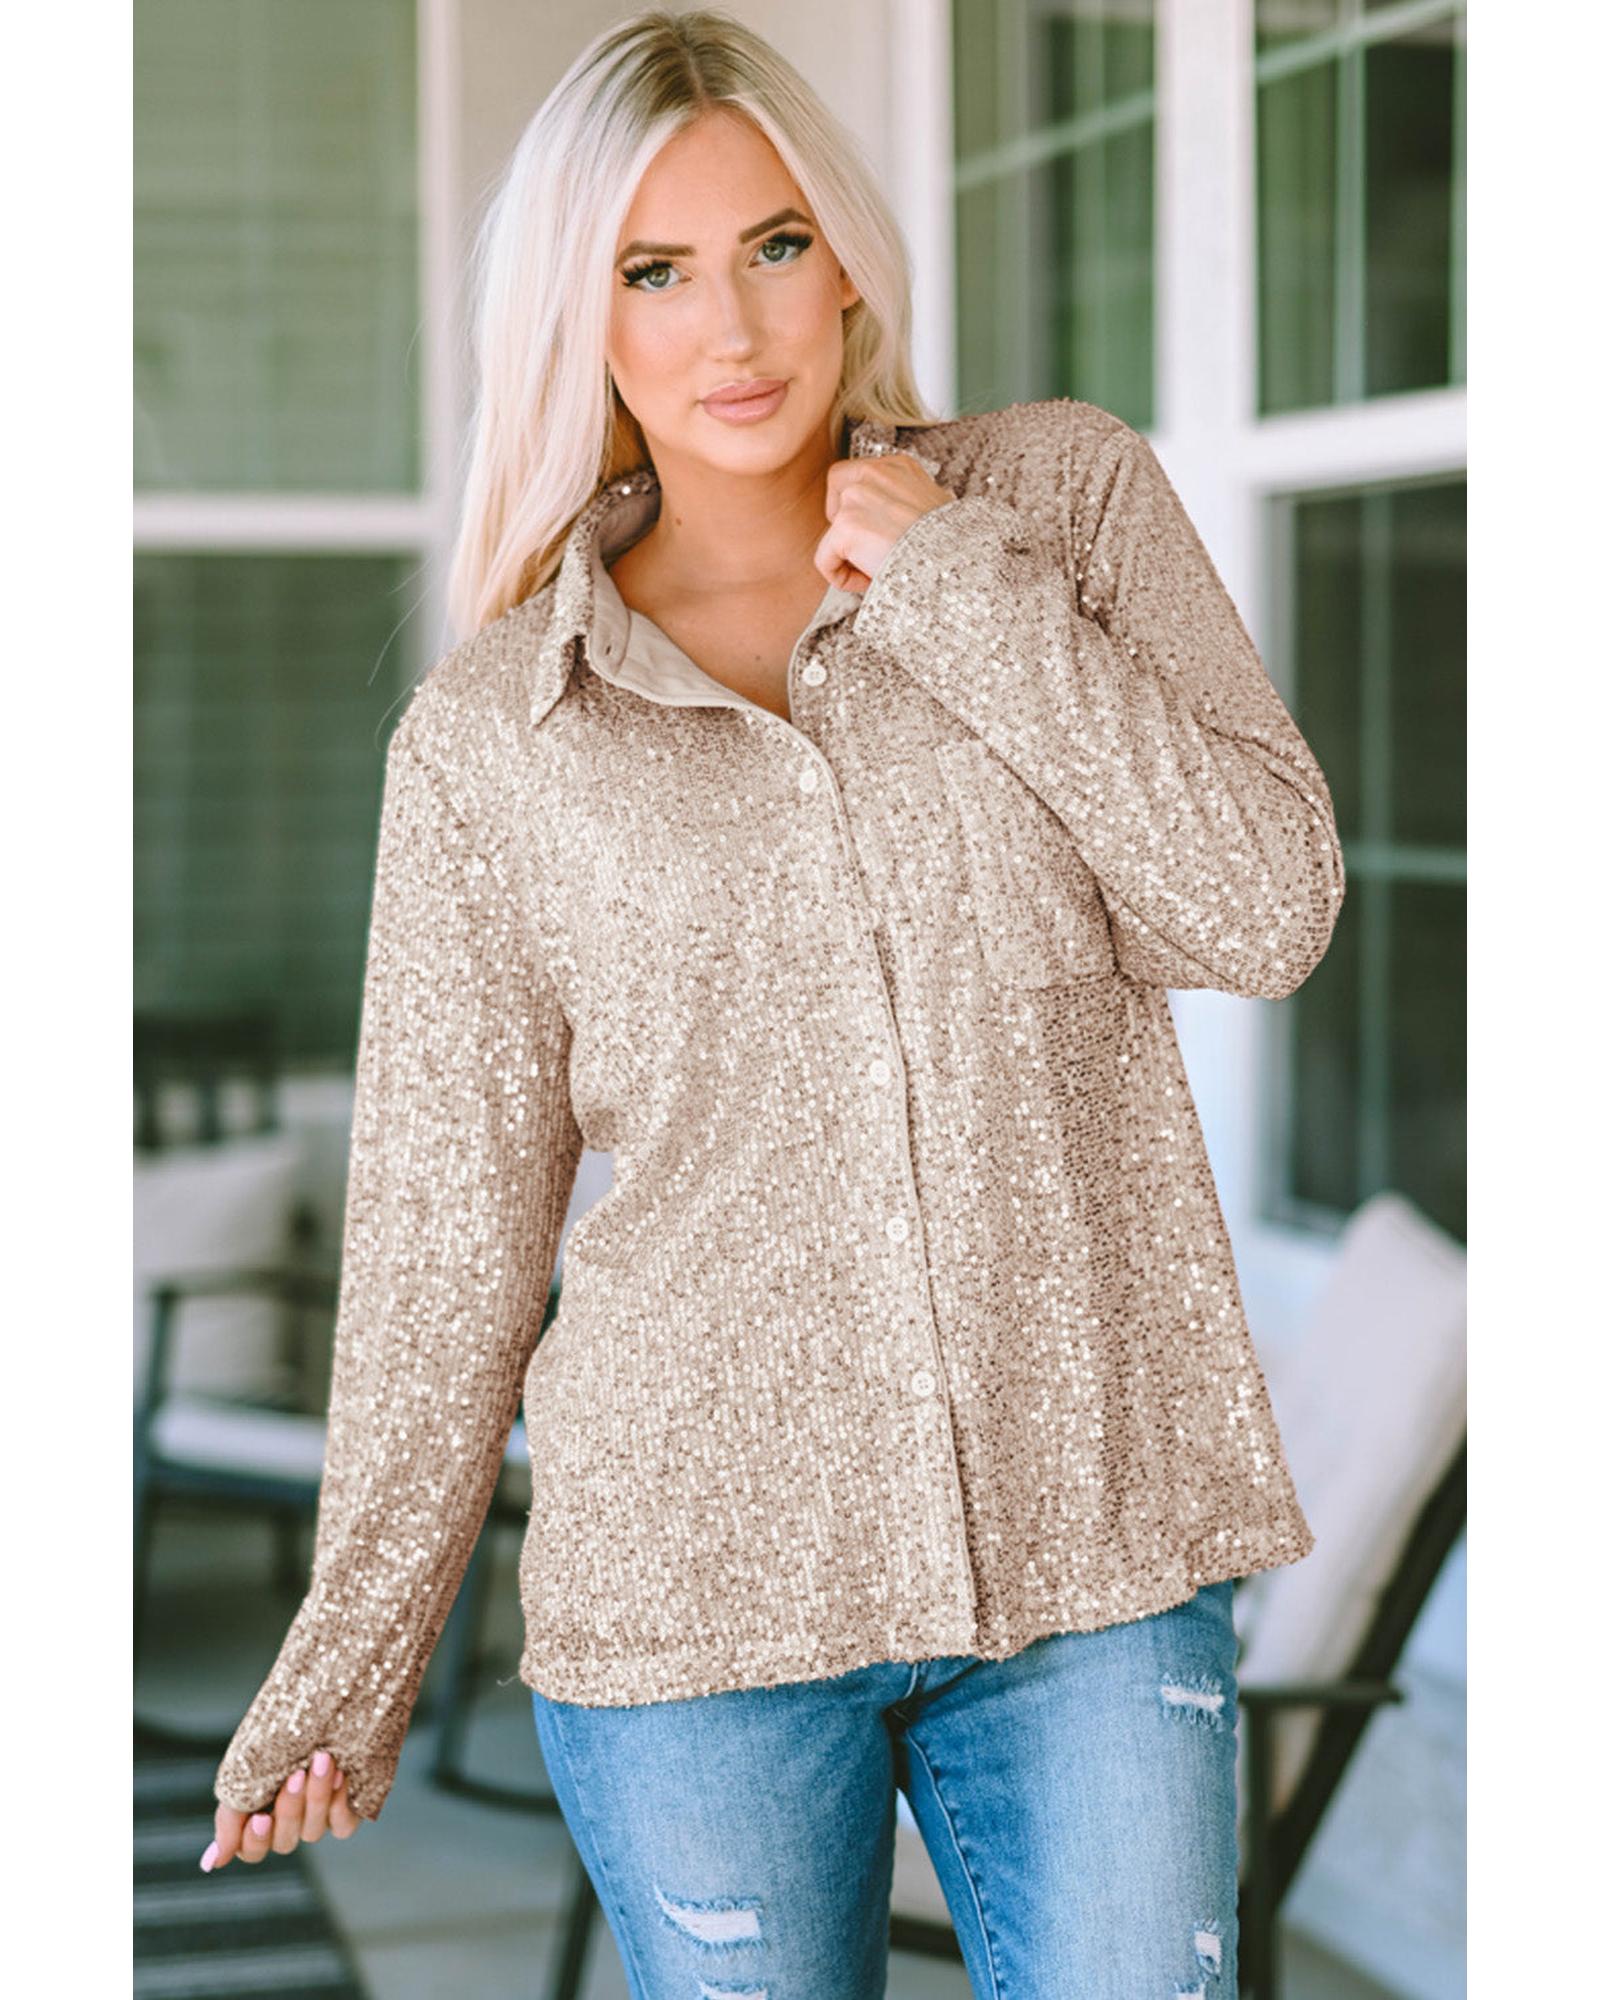 Sequin Collared Bust Pocket Buttoned Shirt - M